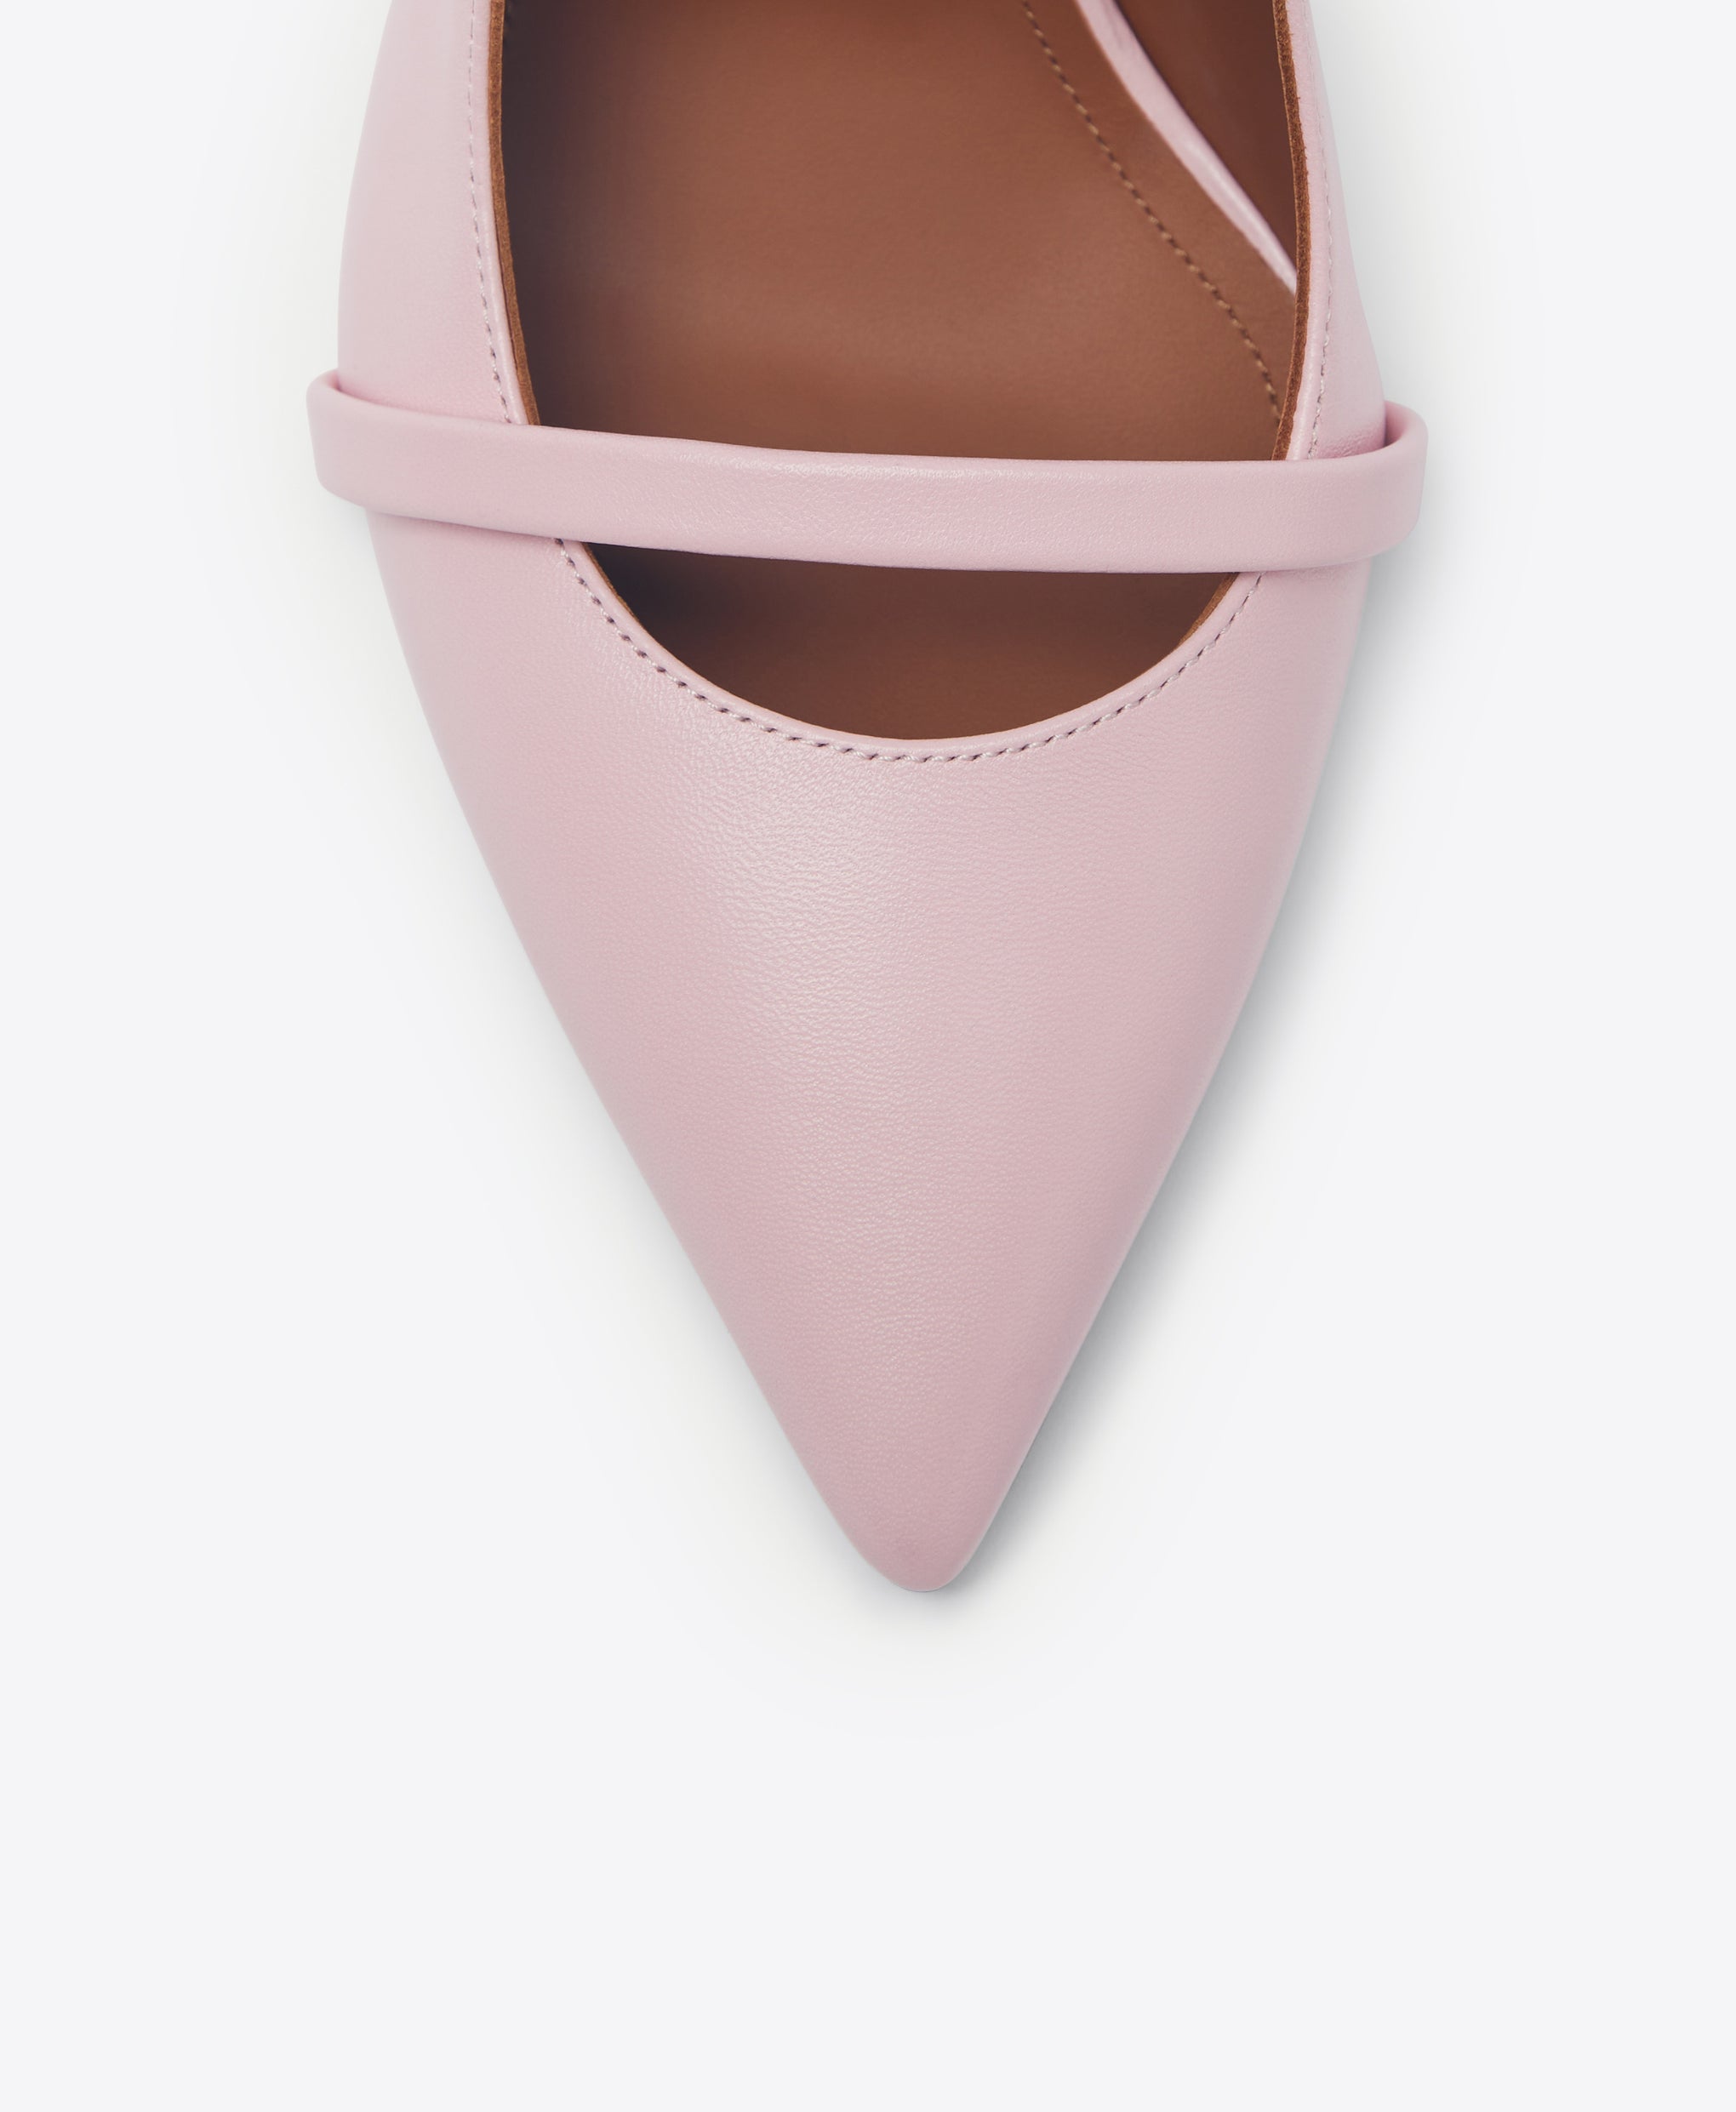 Malone Souliers Maureen 85mm Light Pink Leather Heeled Pumps